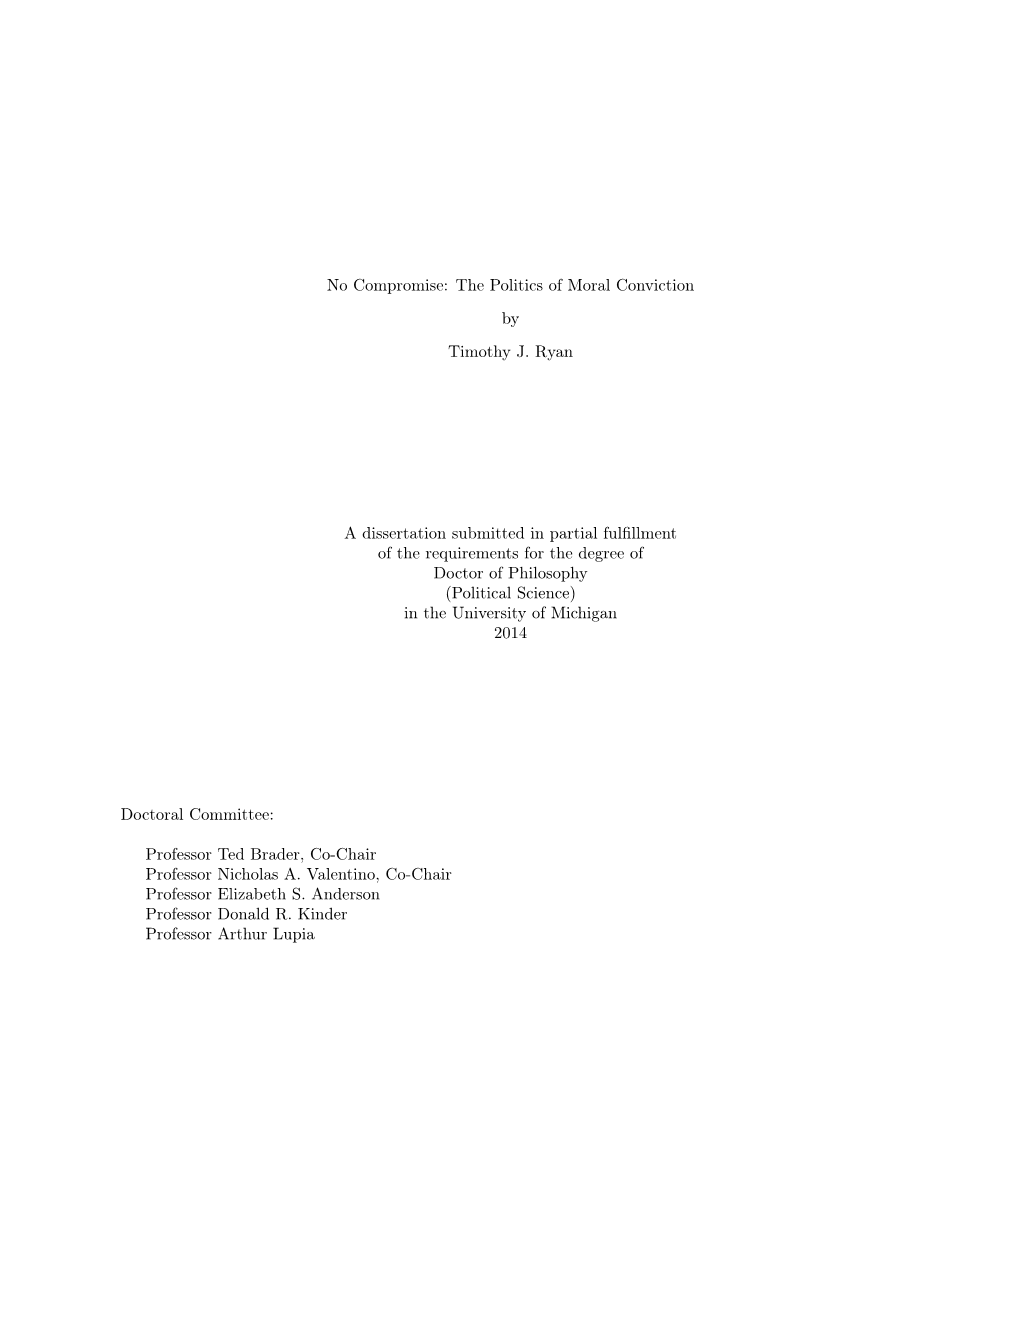 The Politics of Moral Conviction by Timothy J. Ryan a Dissertation